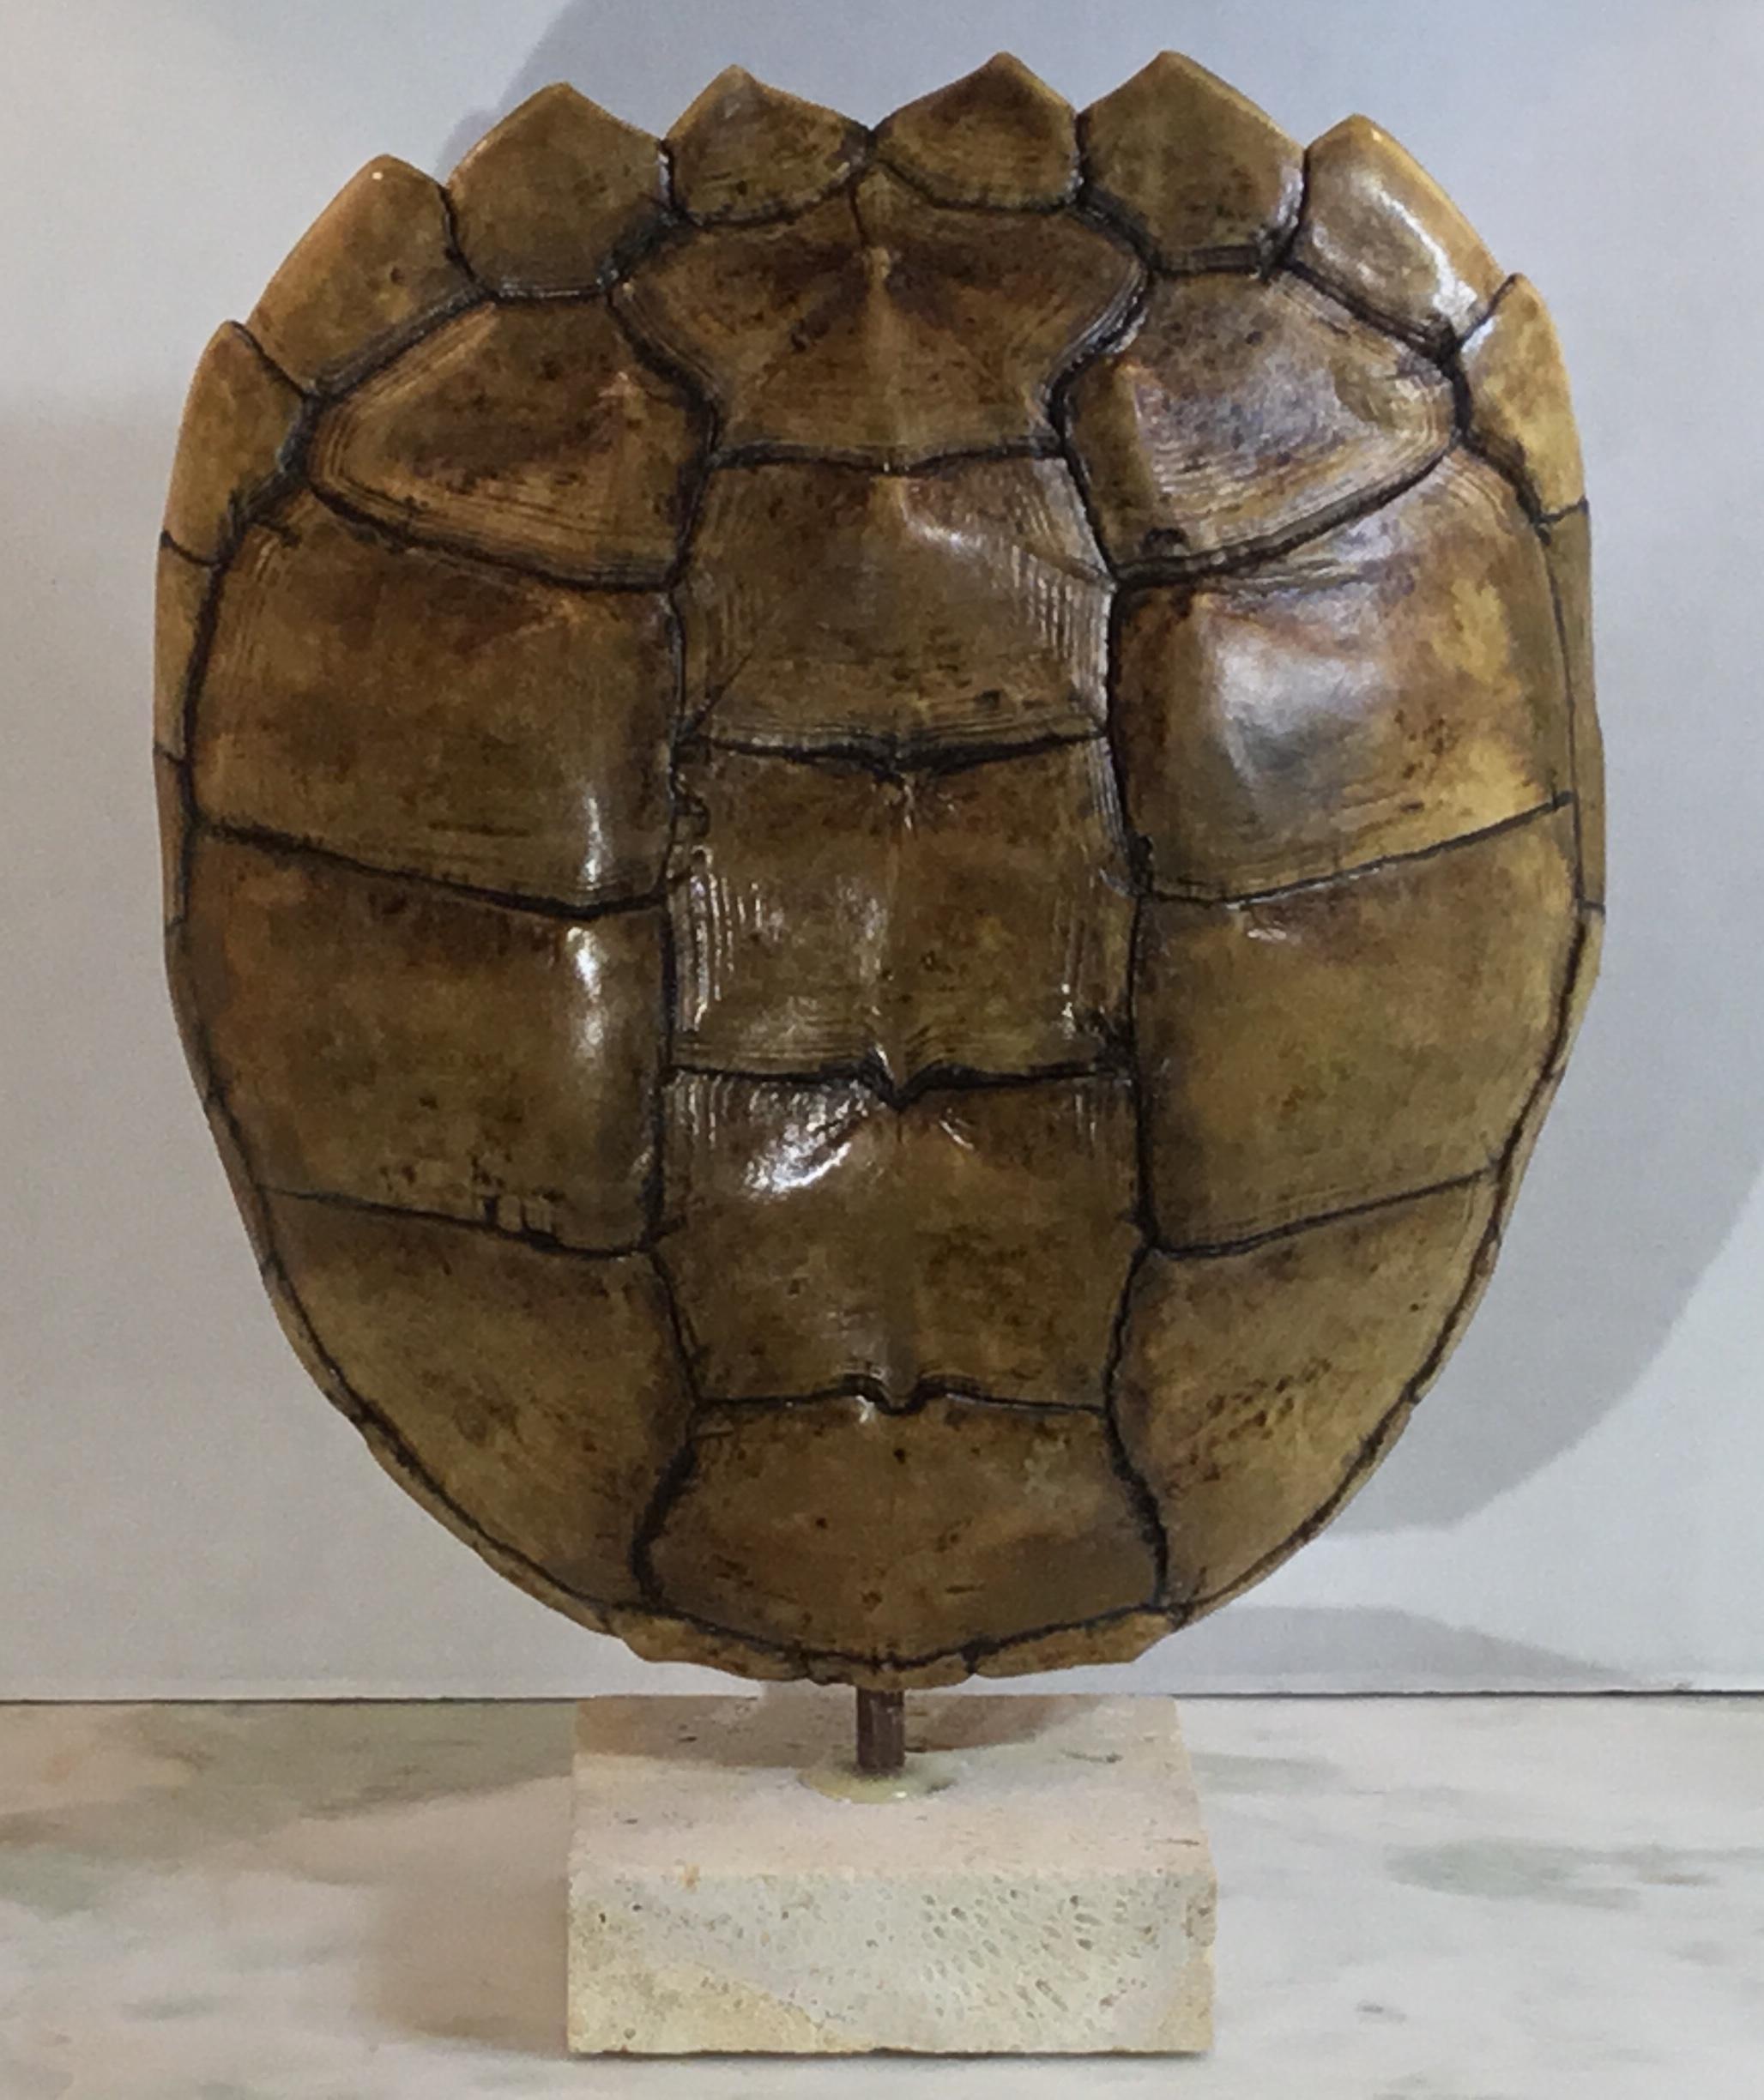 Genuine American Frash Water Snapping Turtle Shell 8